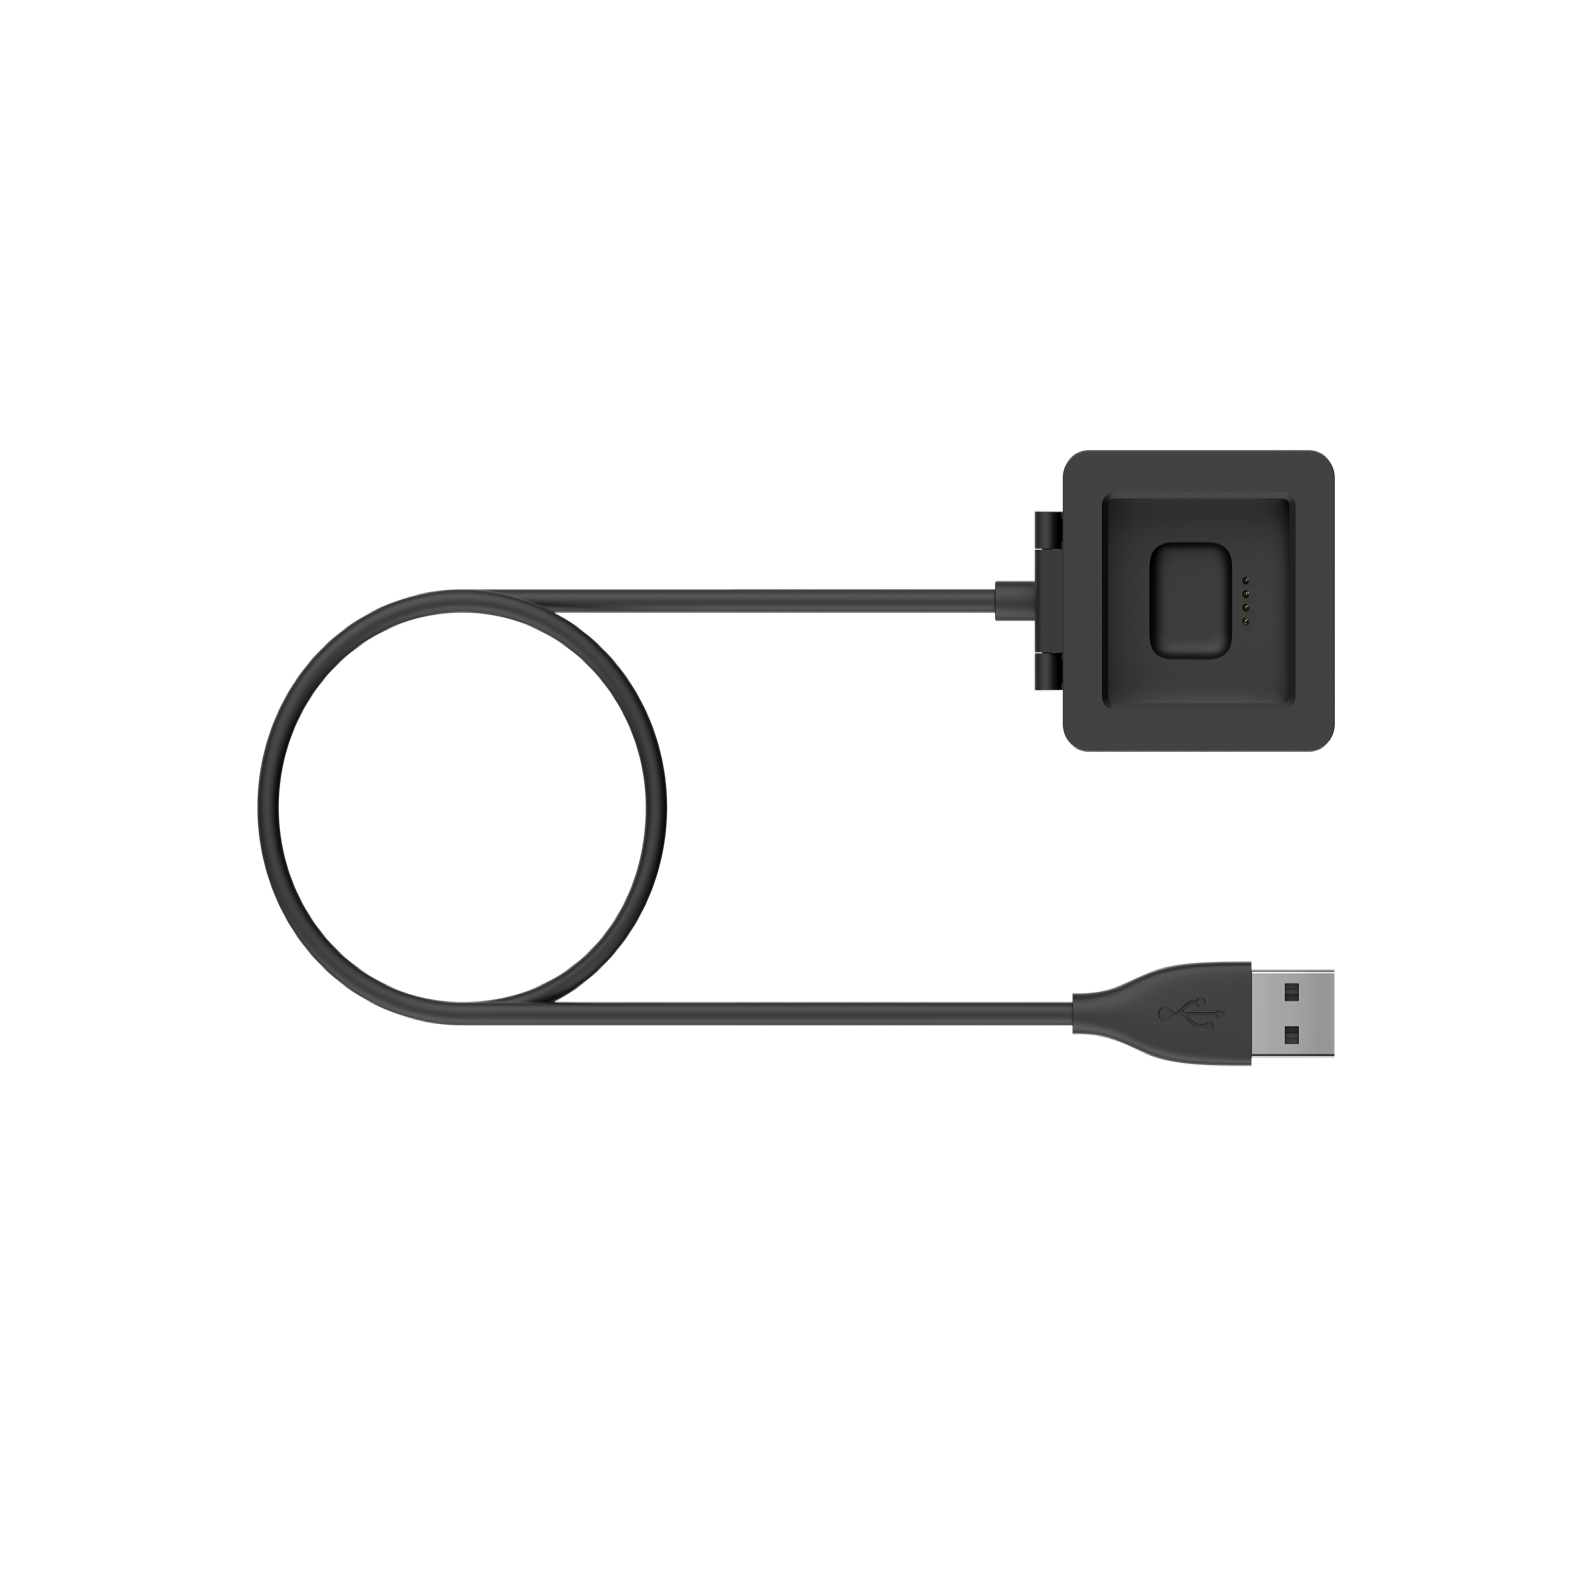 charger USB Fitbit Blaze Charger Black Fitbit for Charging Blaze 